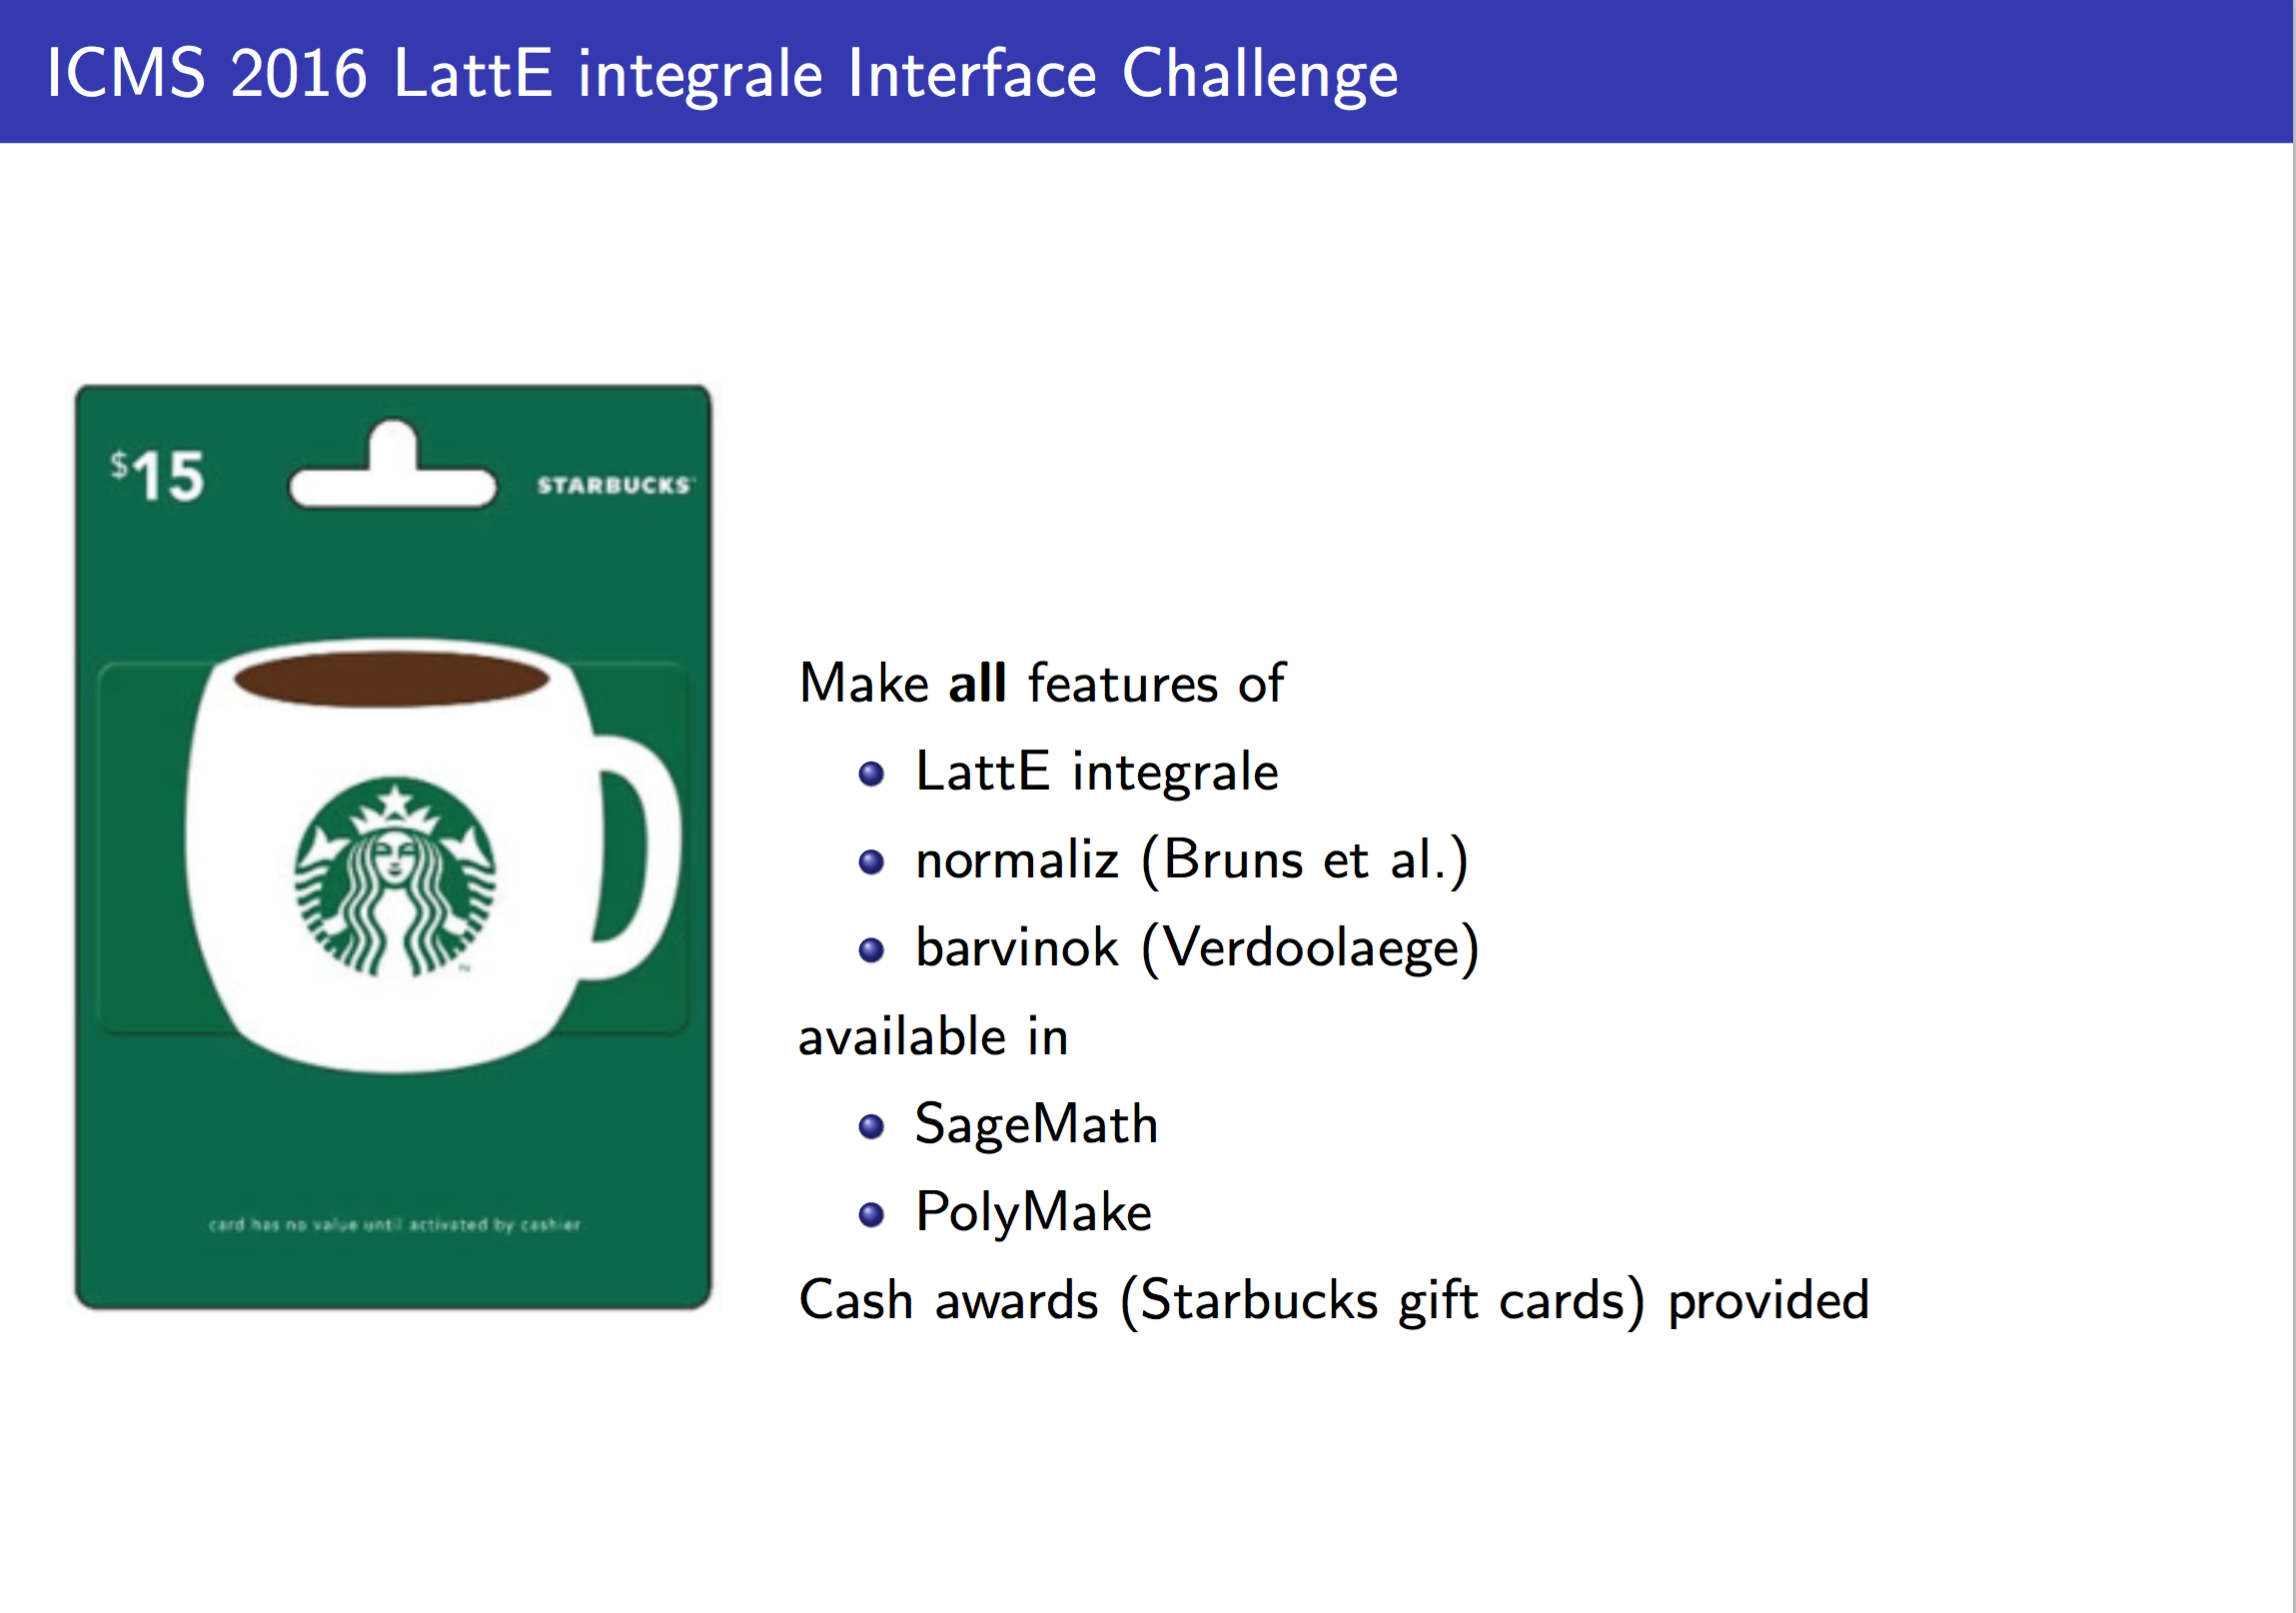 _images/latte-interface-challenge.png